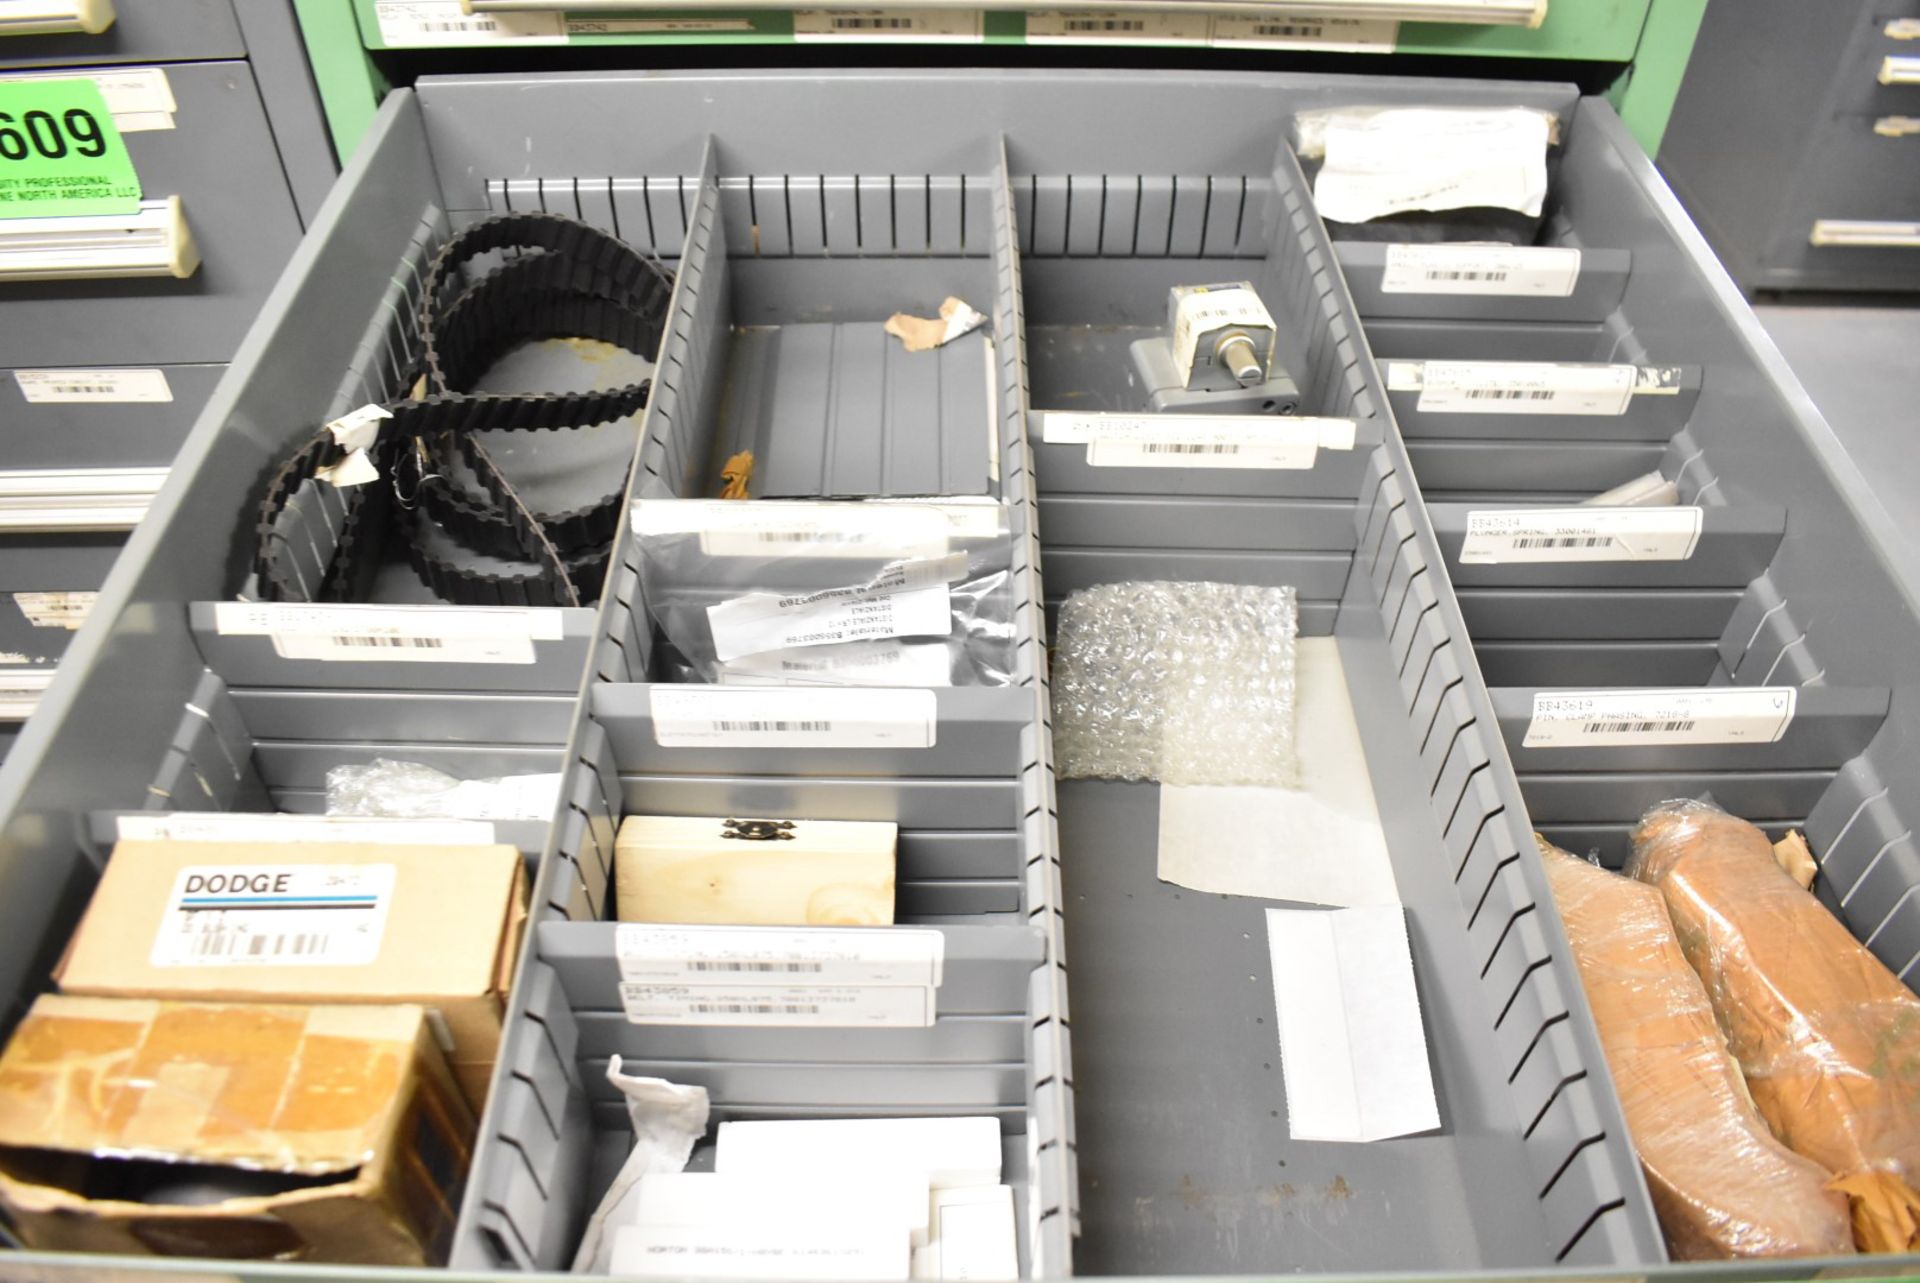 LOT/ CONTENTS OF CABINET - INCLUDING RELAYS, SPRINGS, TIMING BELTS, AUTOMATION COMPONENTS, - Image 3 of 6